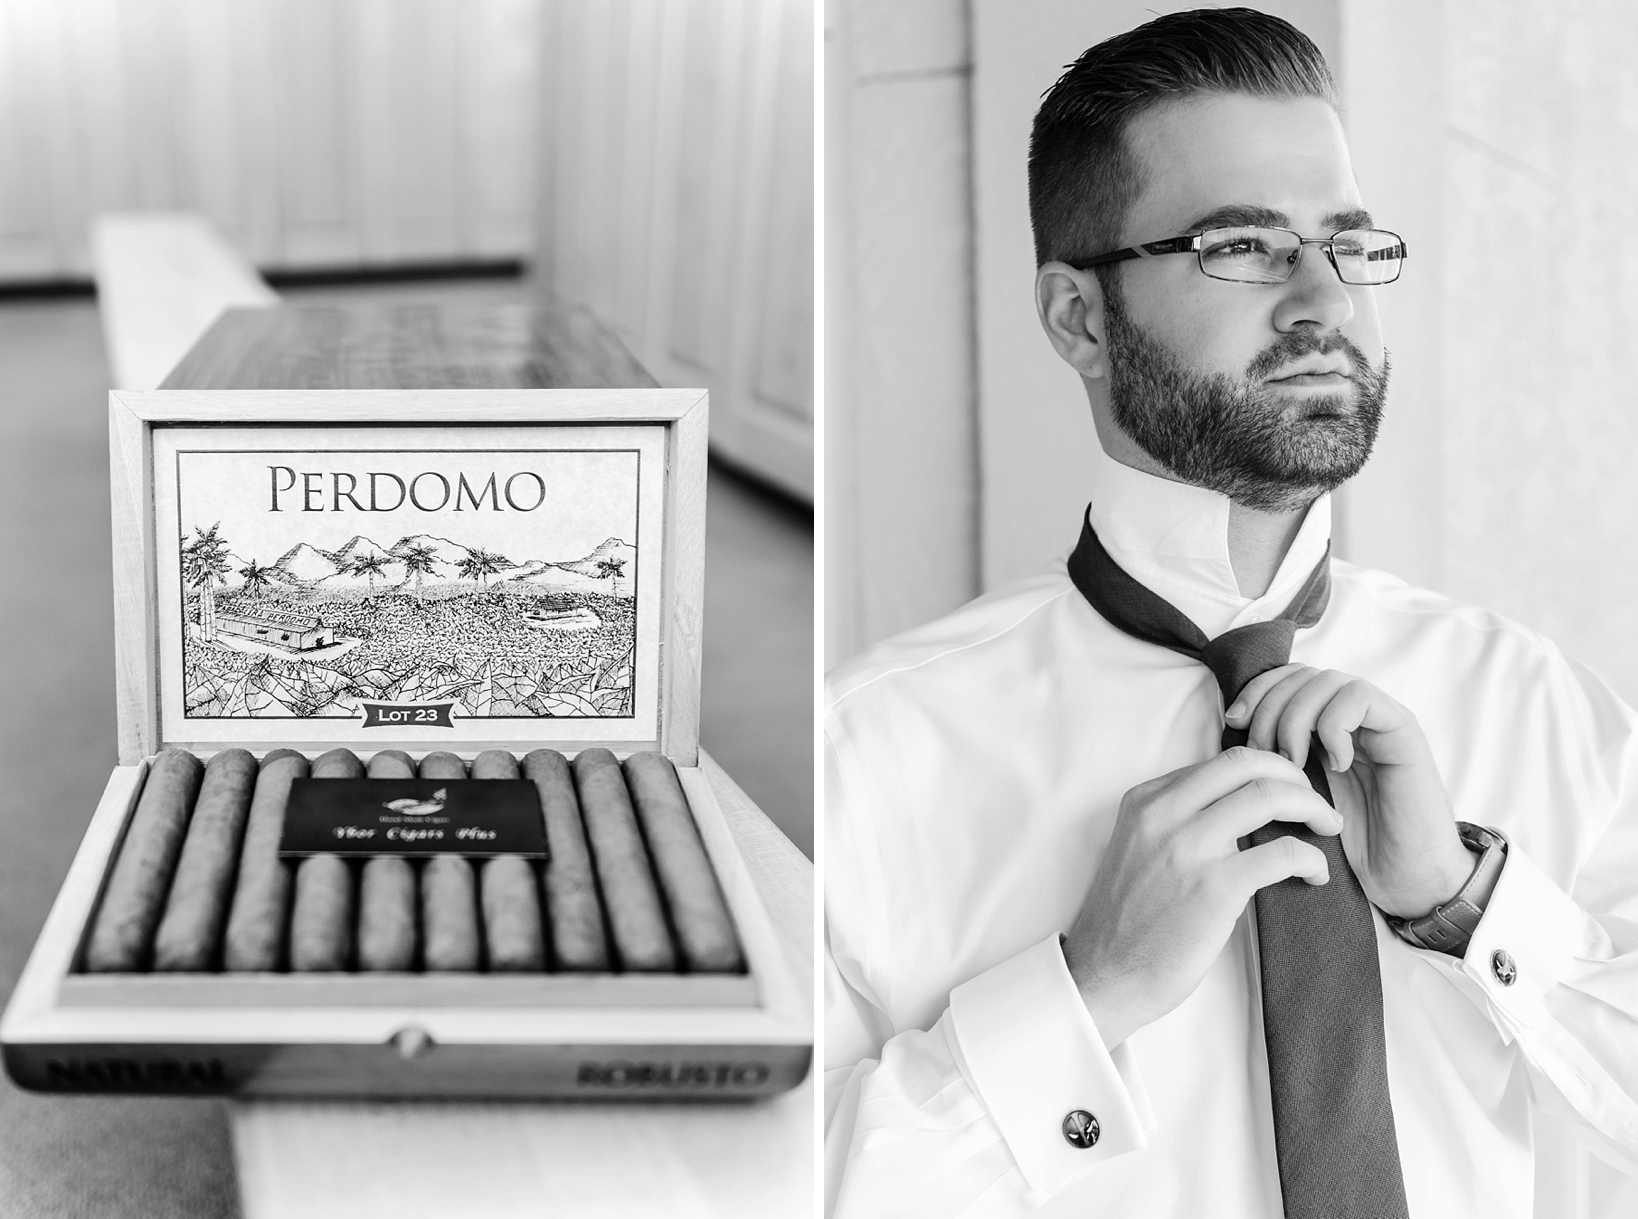 A box of cigars given as a gift to the Groom and an image of him getting ready while putting his tie on